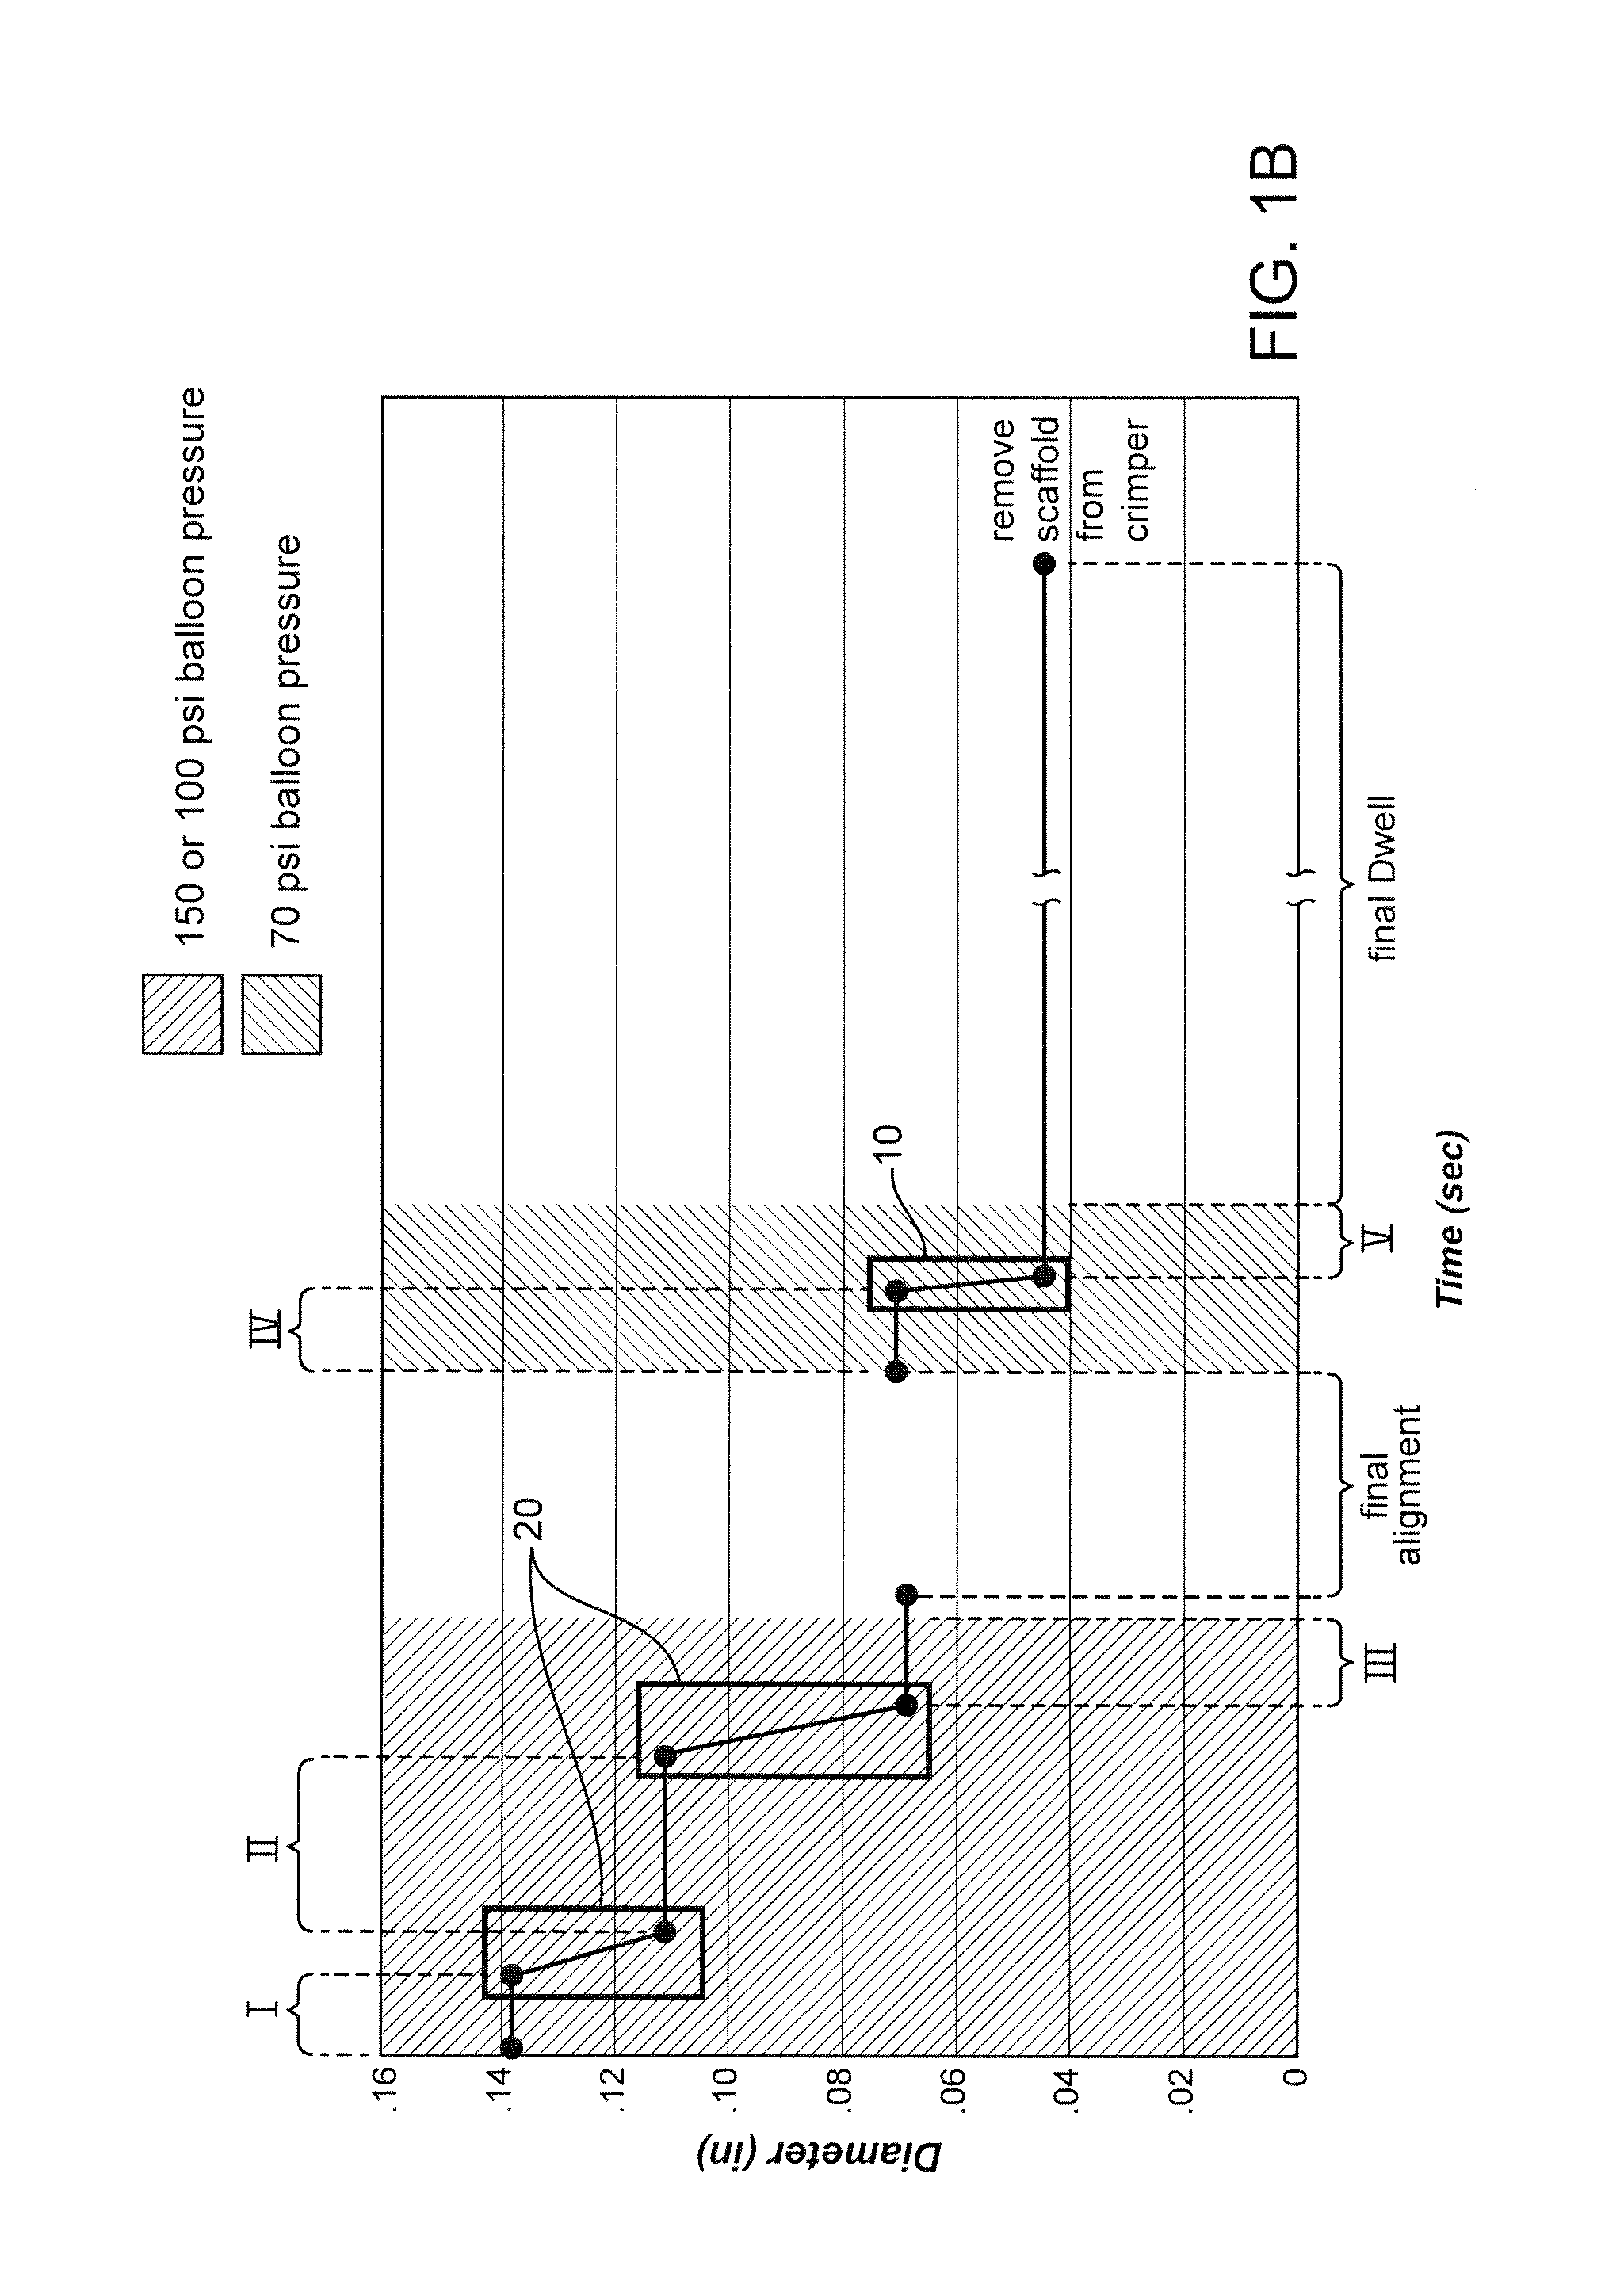 Methods for crimping a polymeric scaffold to a delivery balloon and achieving stable mechanical properties in the scaffold after crimping